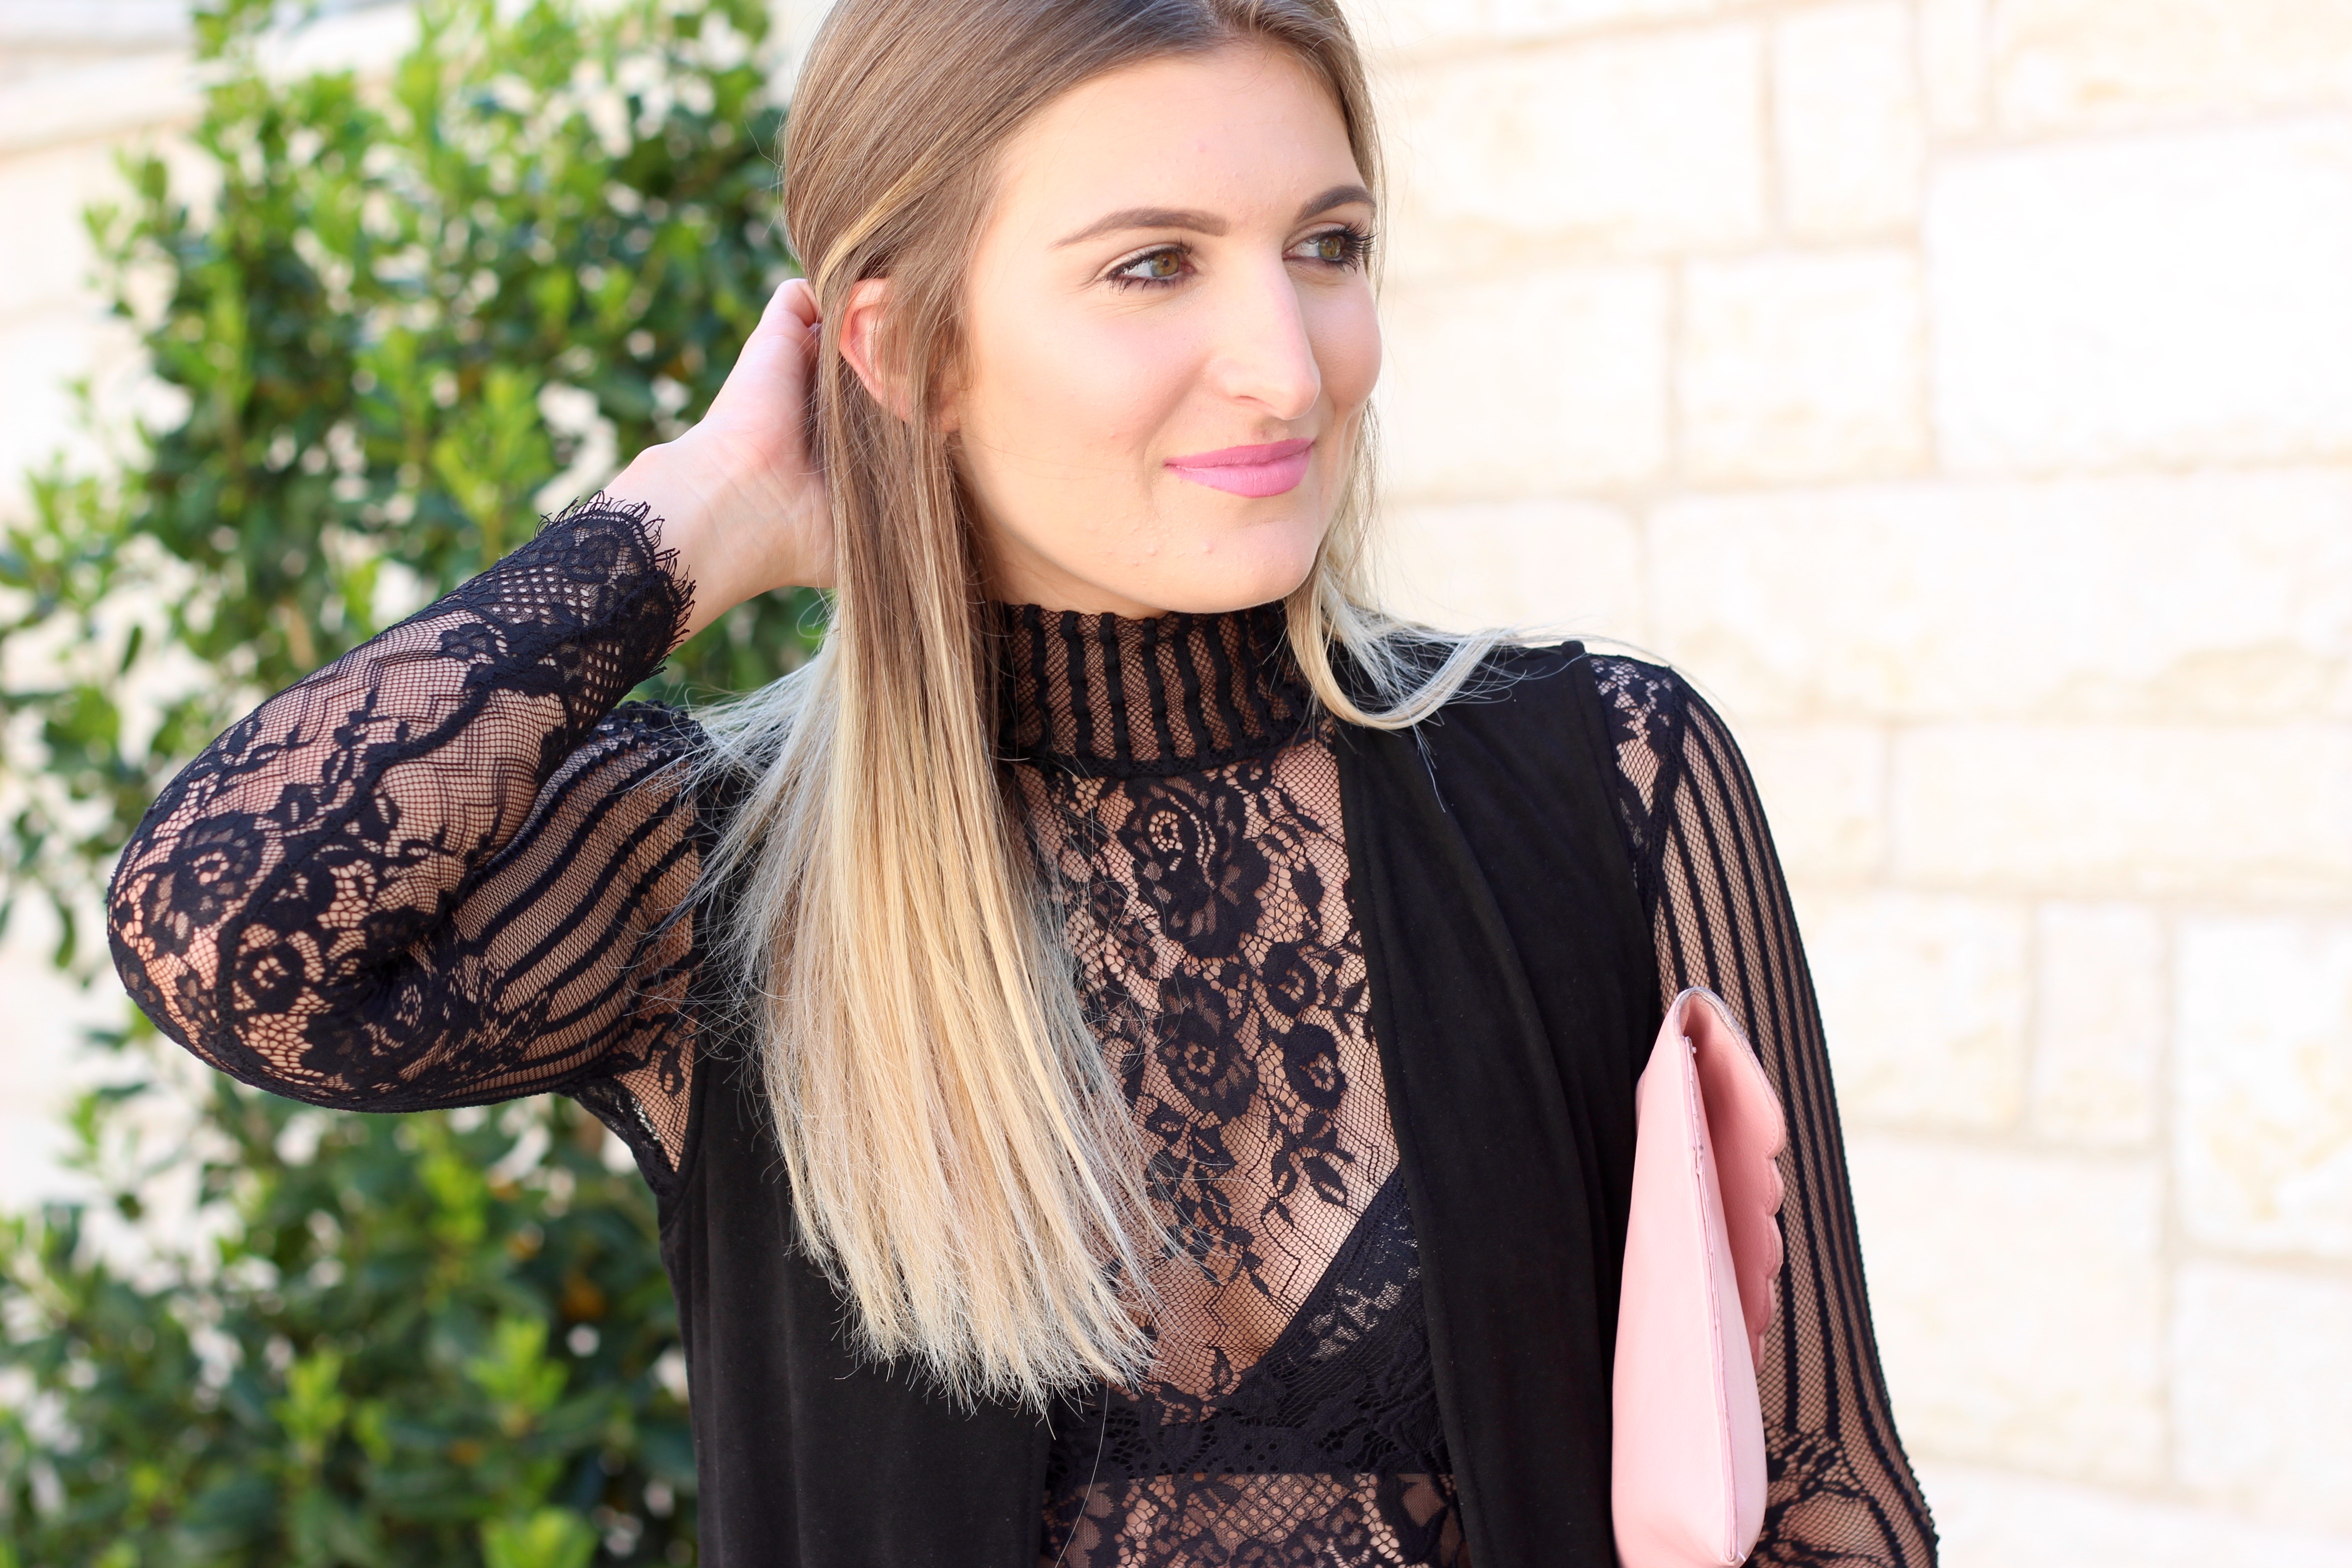 lace crop top details - Lingerie Outfit By Day by popular Texas fashion blogger Audrey Madison Stowe